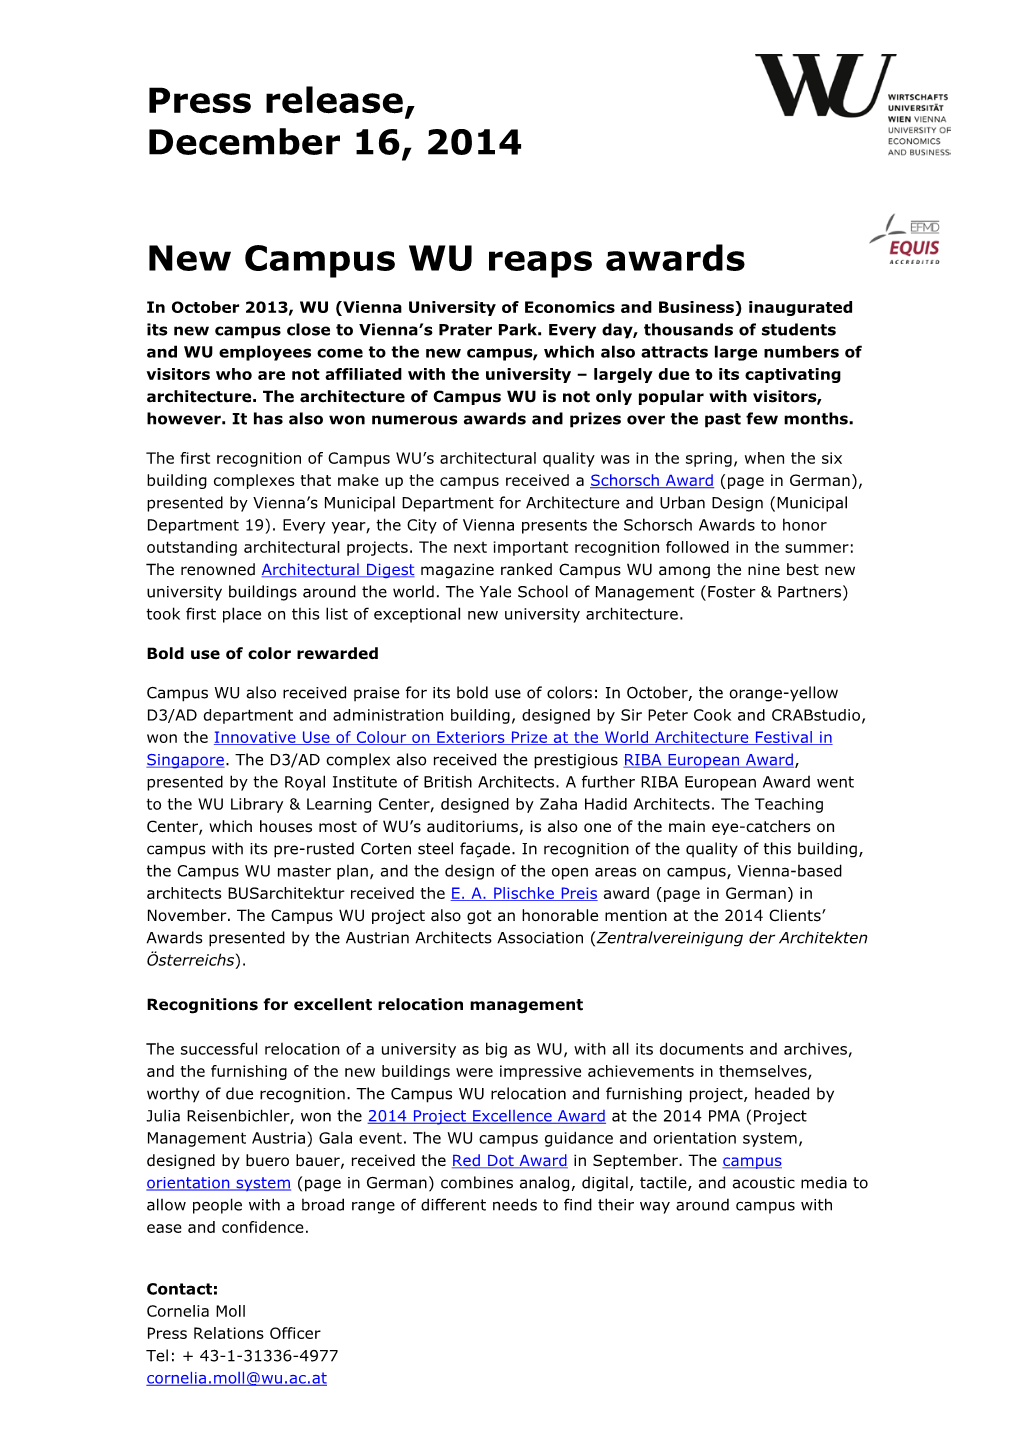 New Campus WU Reaps Awards As